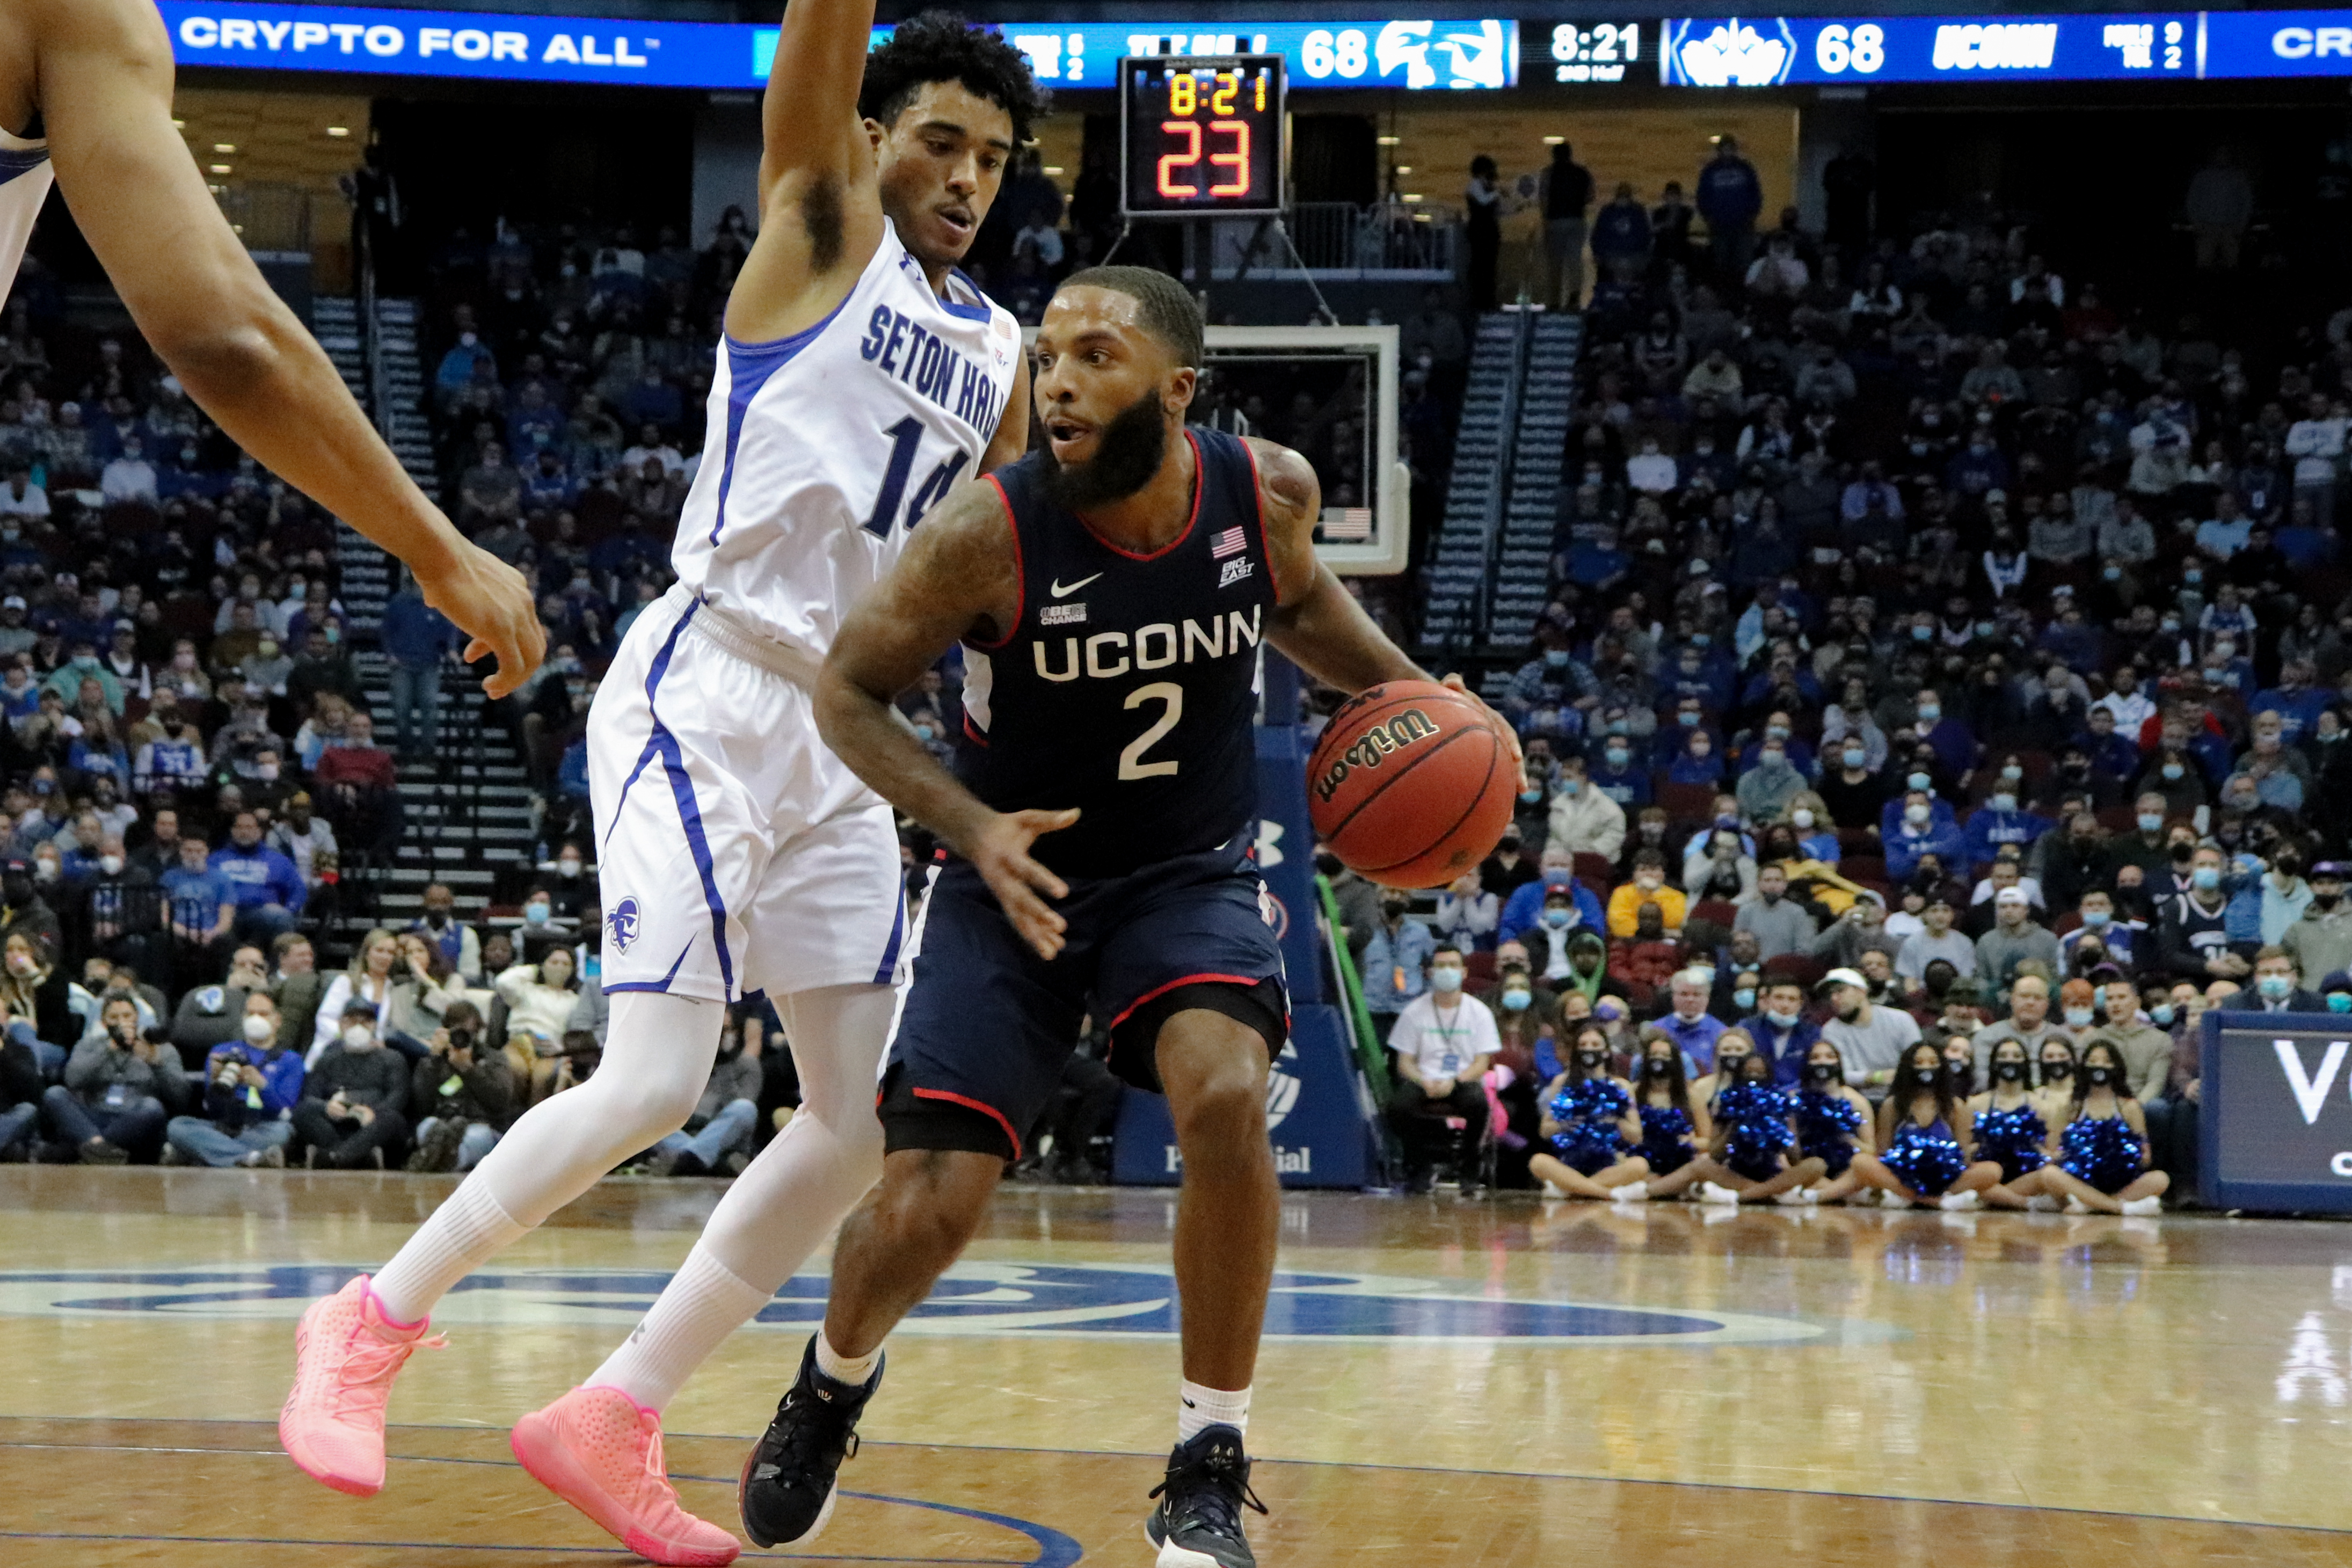 Seton Hall's Jared Rhoden guards UConn's R.J. Cole during a home game.